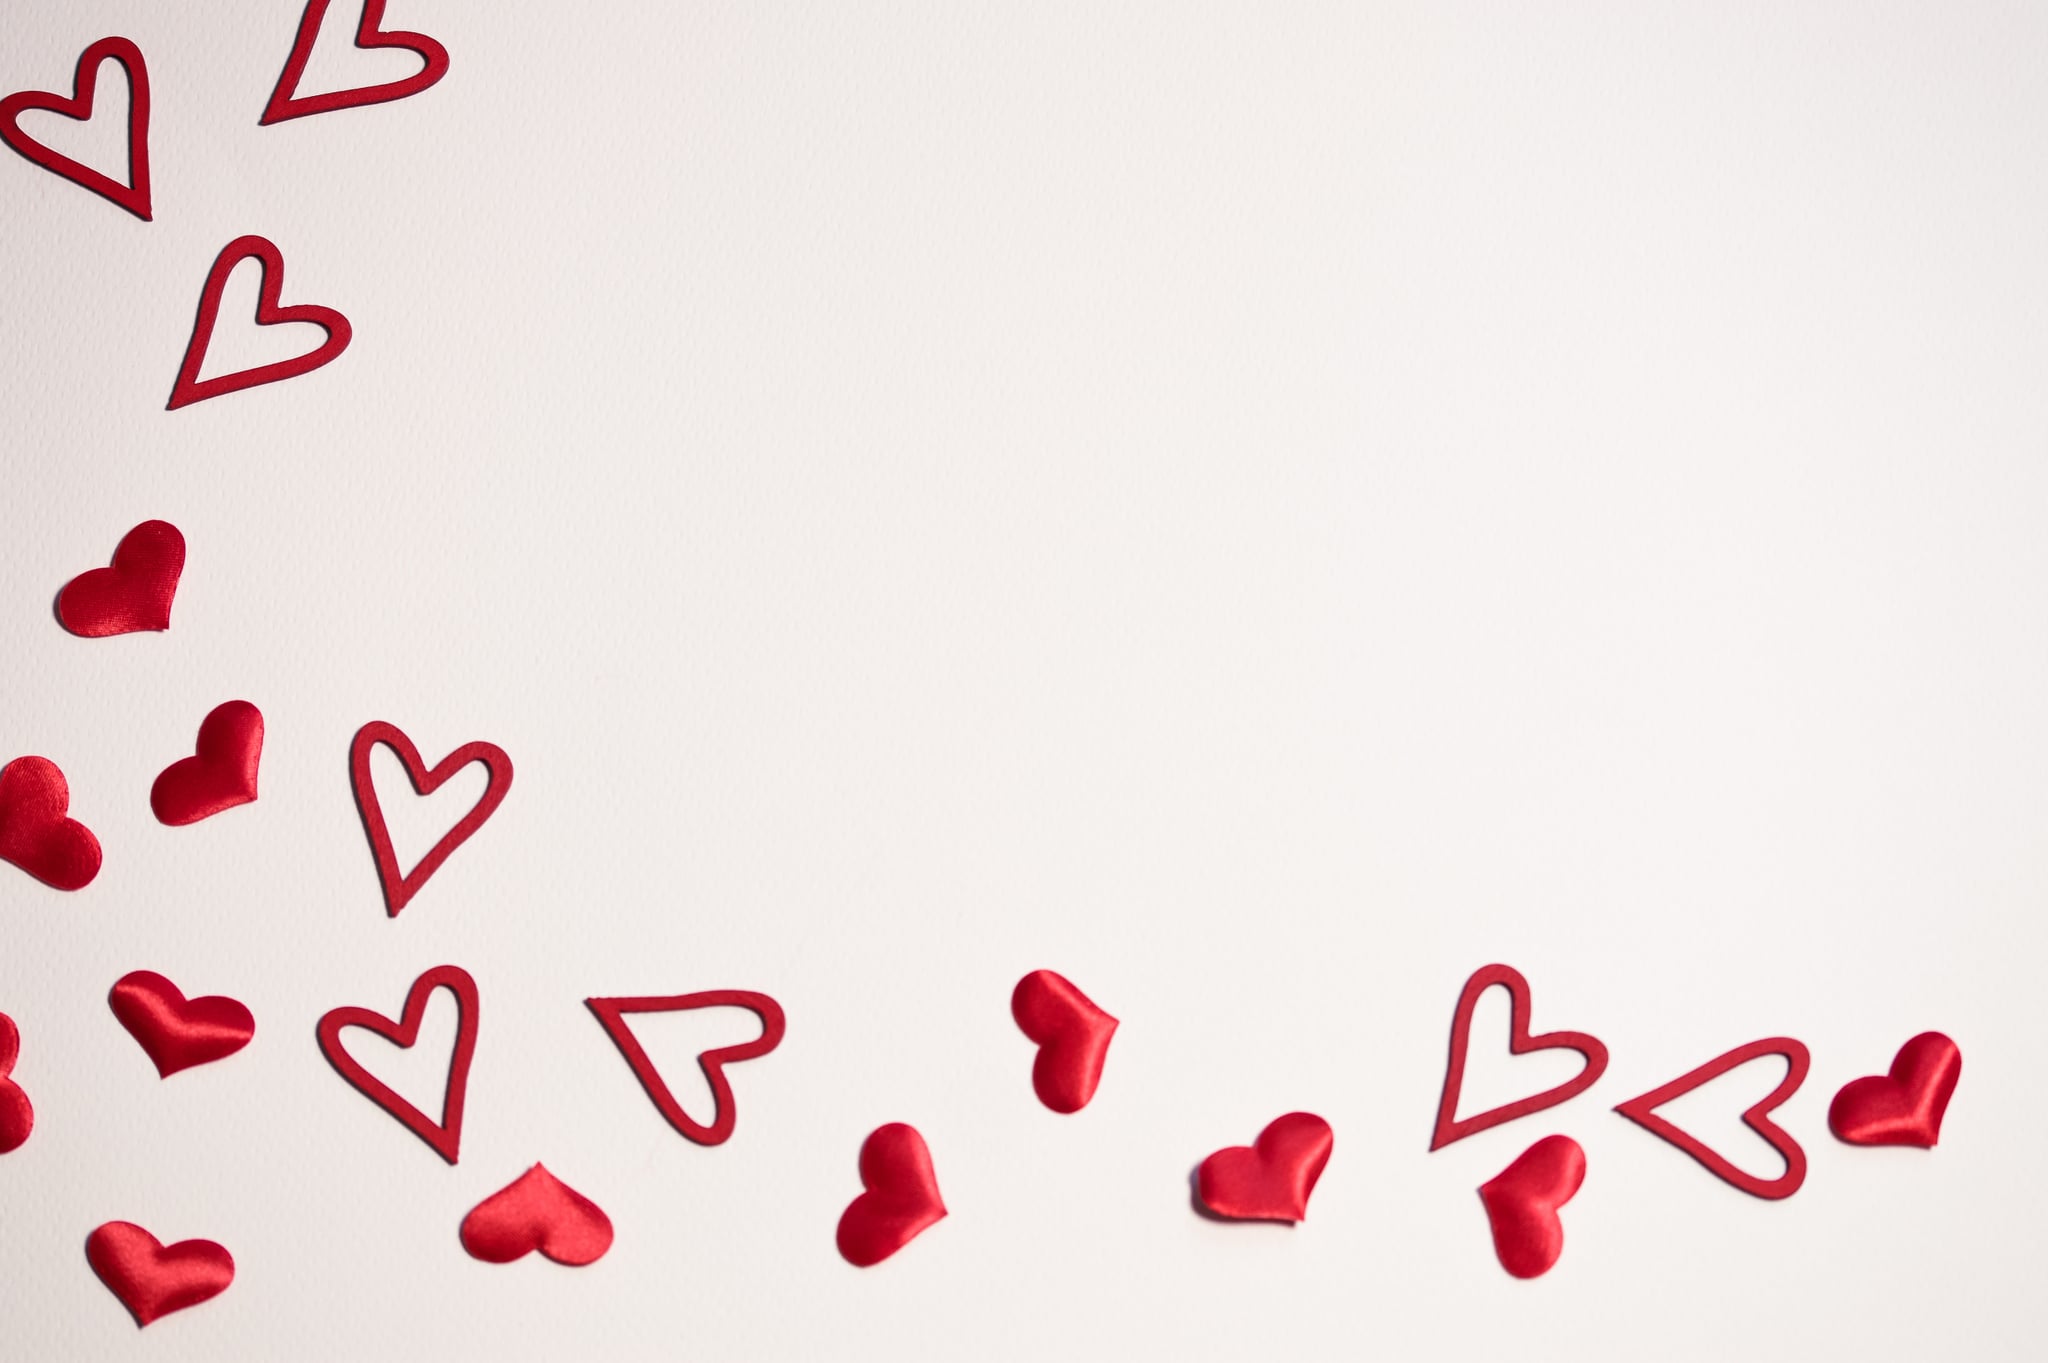 Technology & Gadgets Valentine's Day Desktop Background That Will Give You Heart Eyes